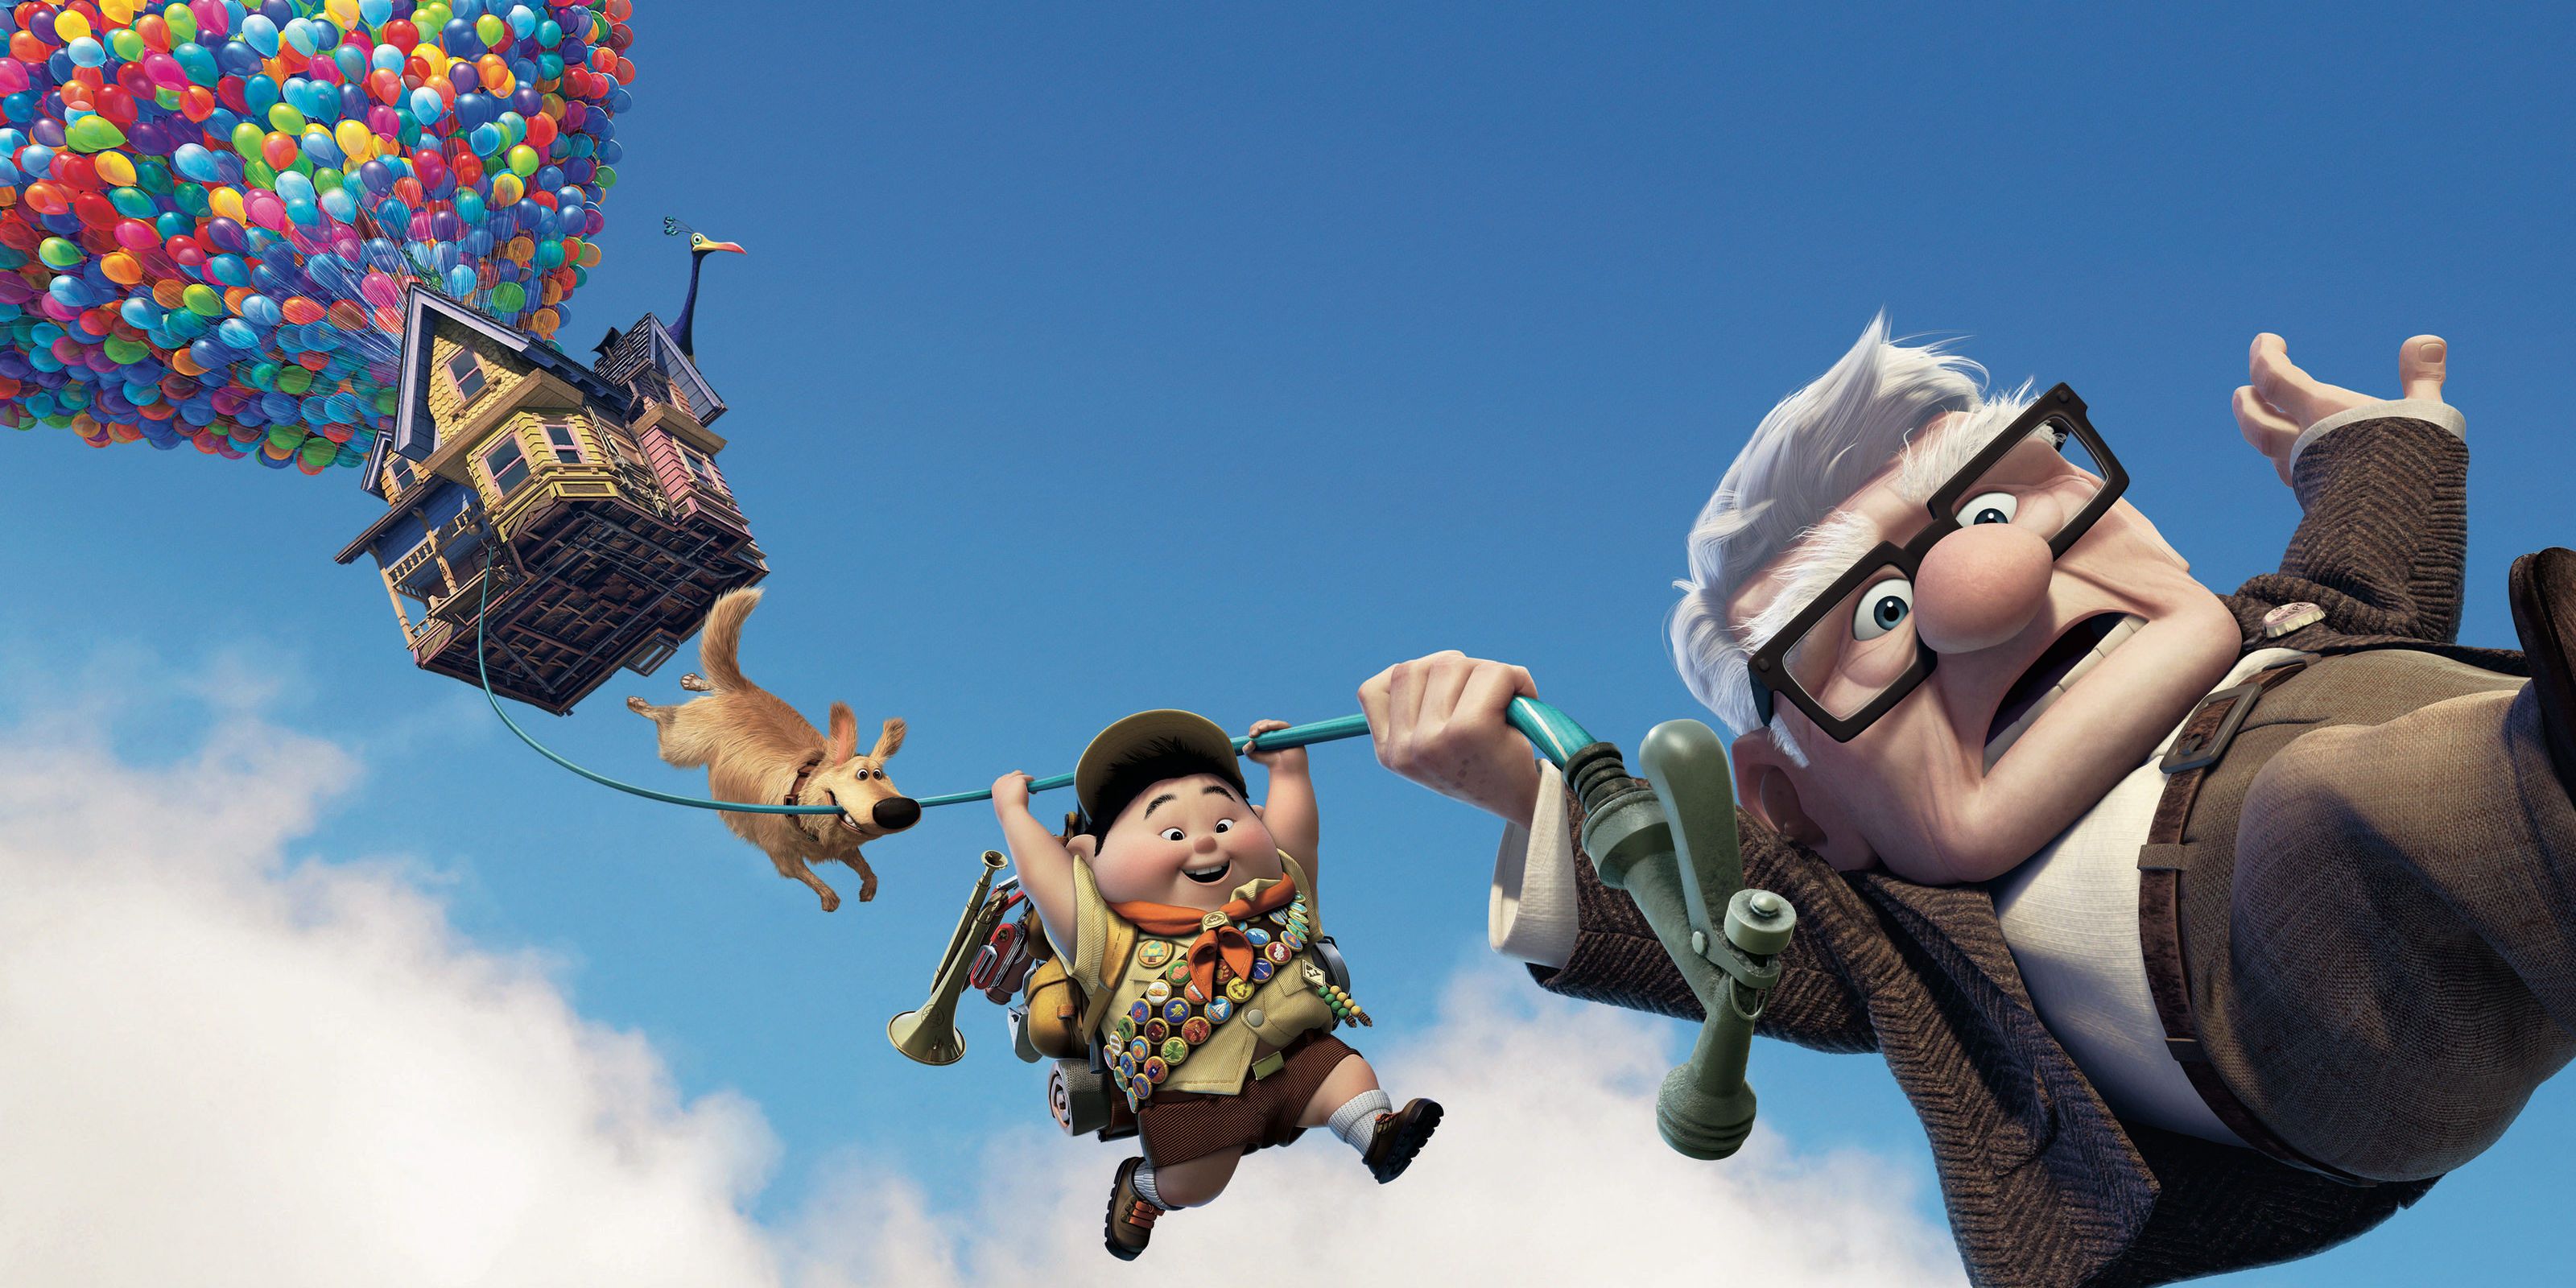 Russell and Carl fall in Up